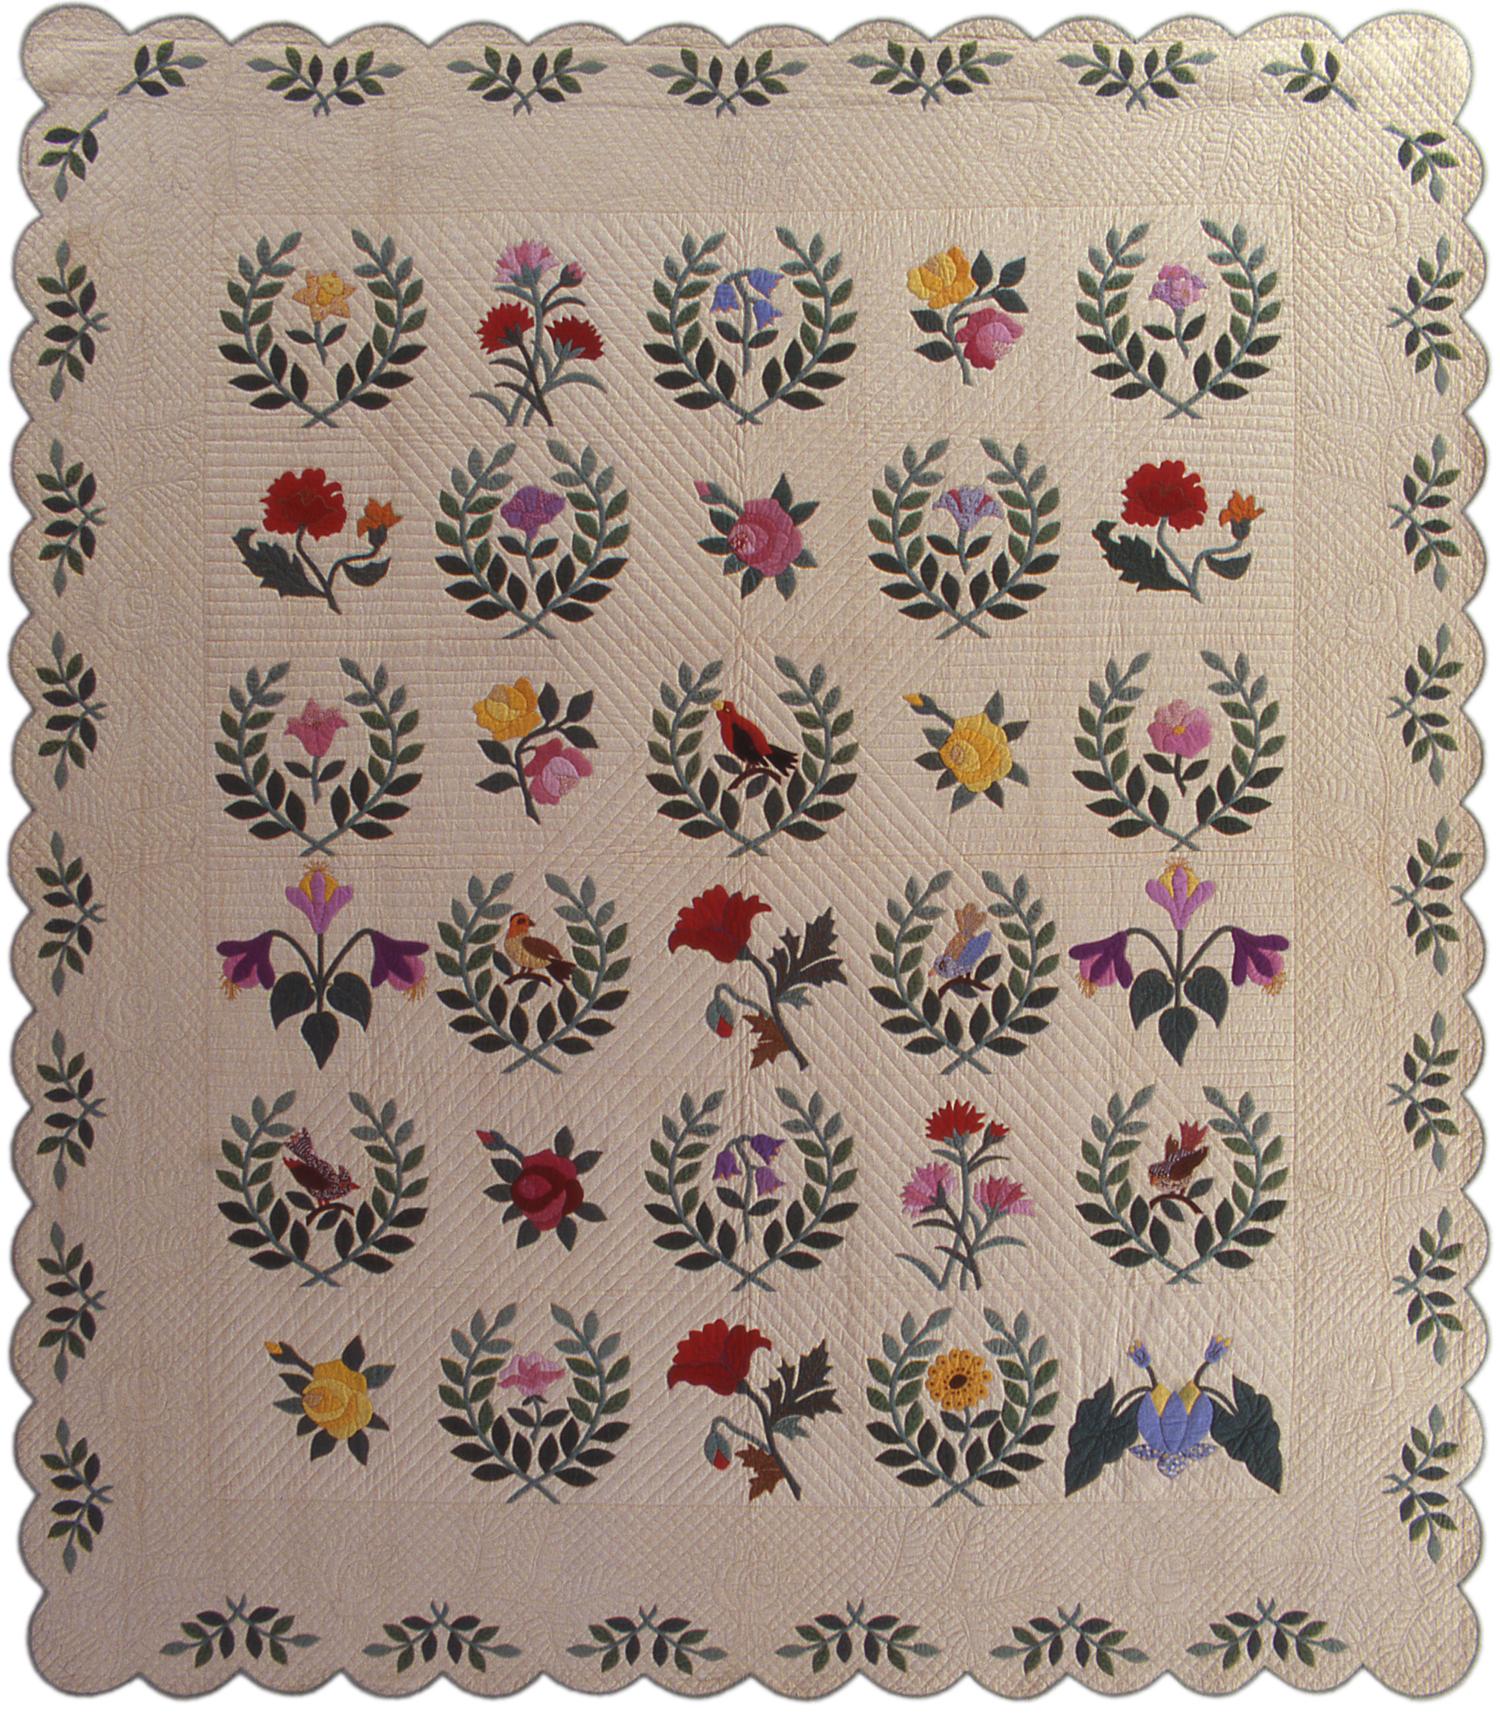 A 1935 quilt made with a "Nancy Page" laurel wreath quilt pattern